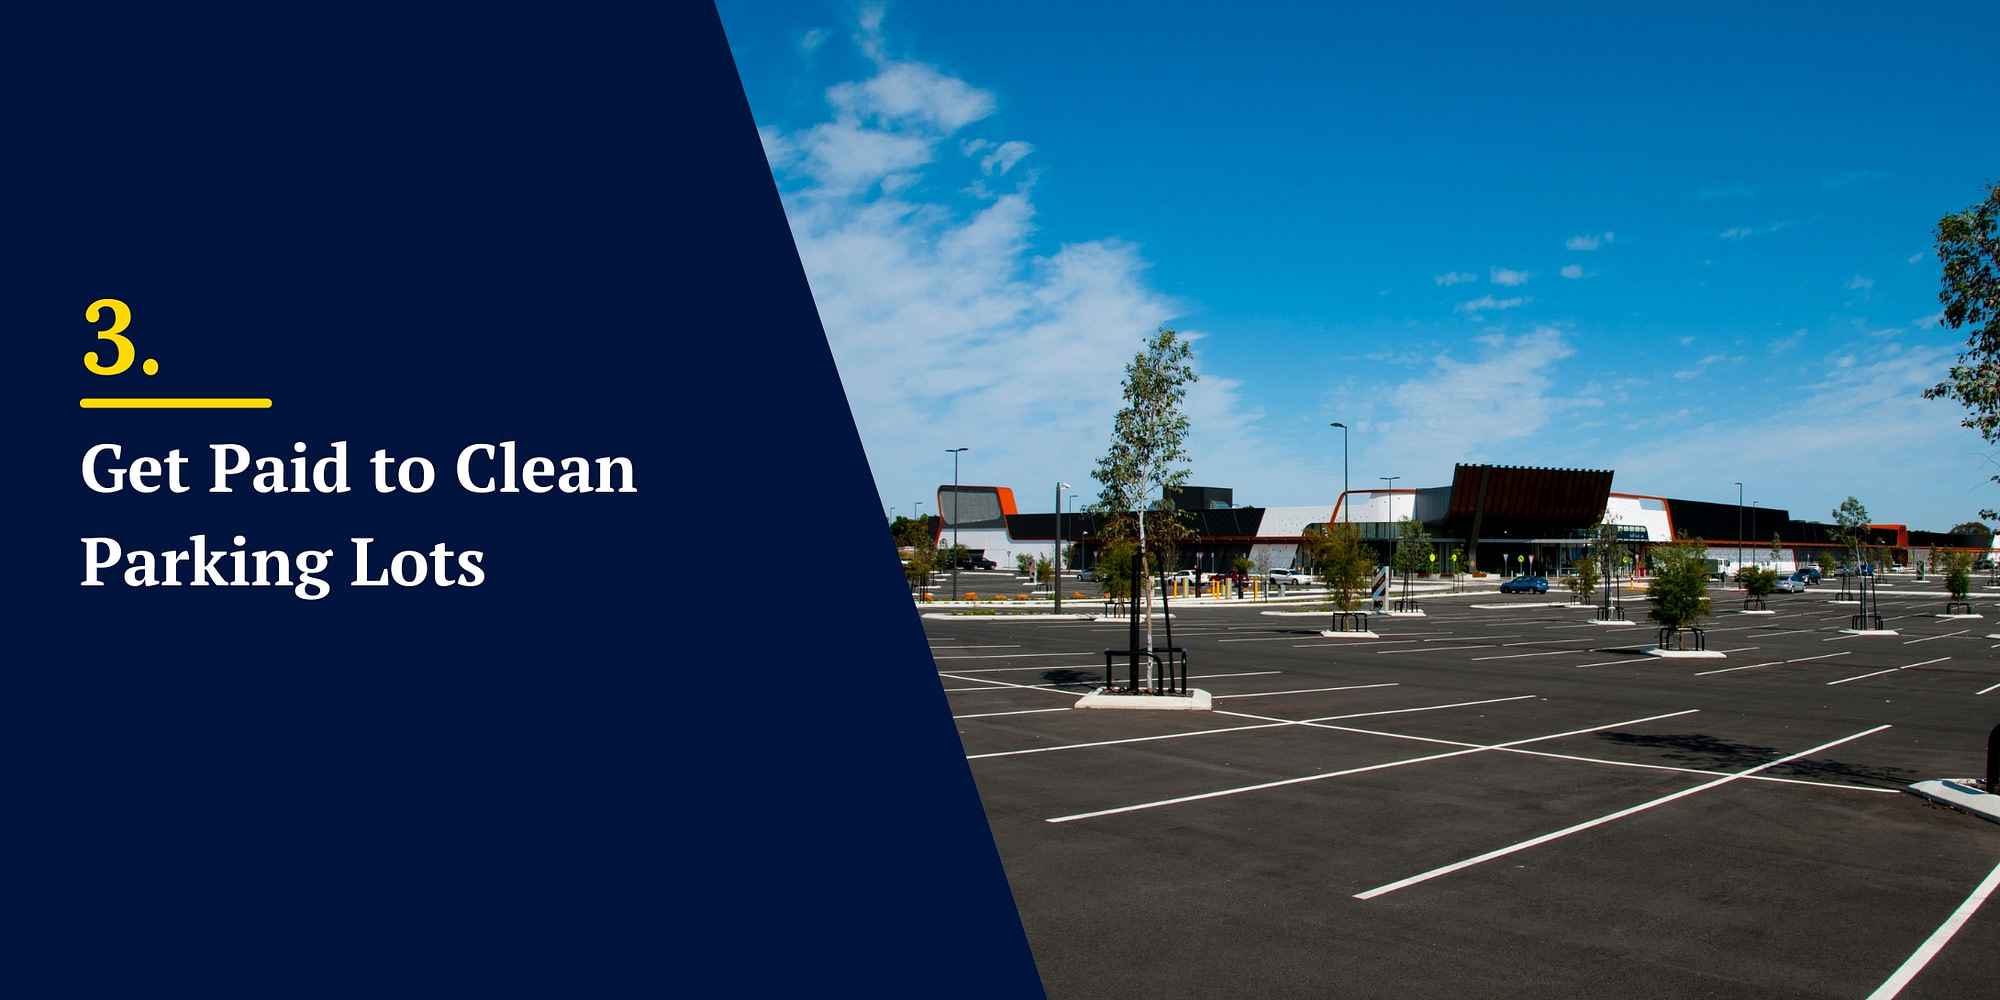 Get Paid to Clean Parking Lots